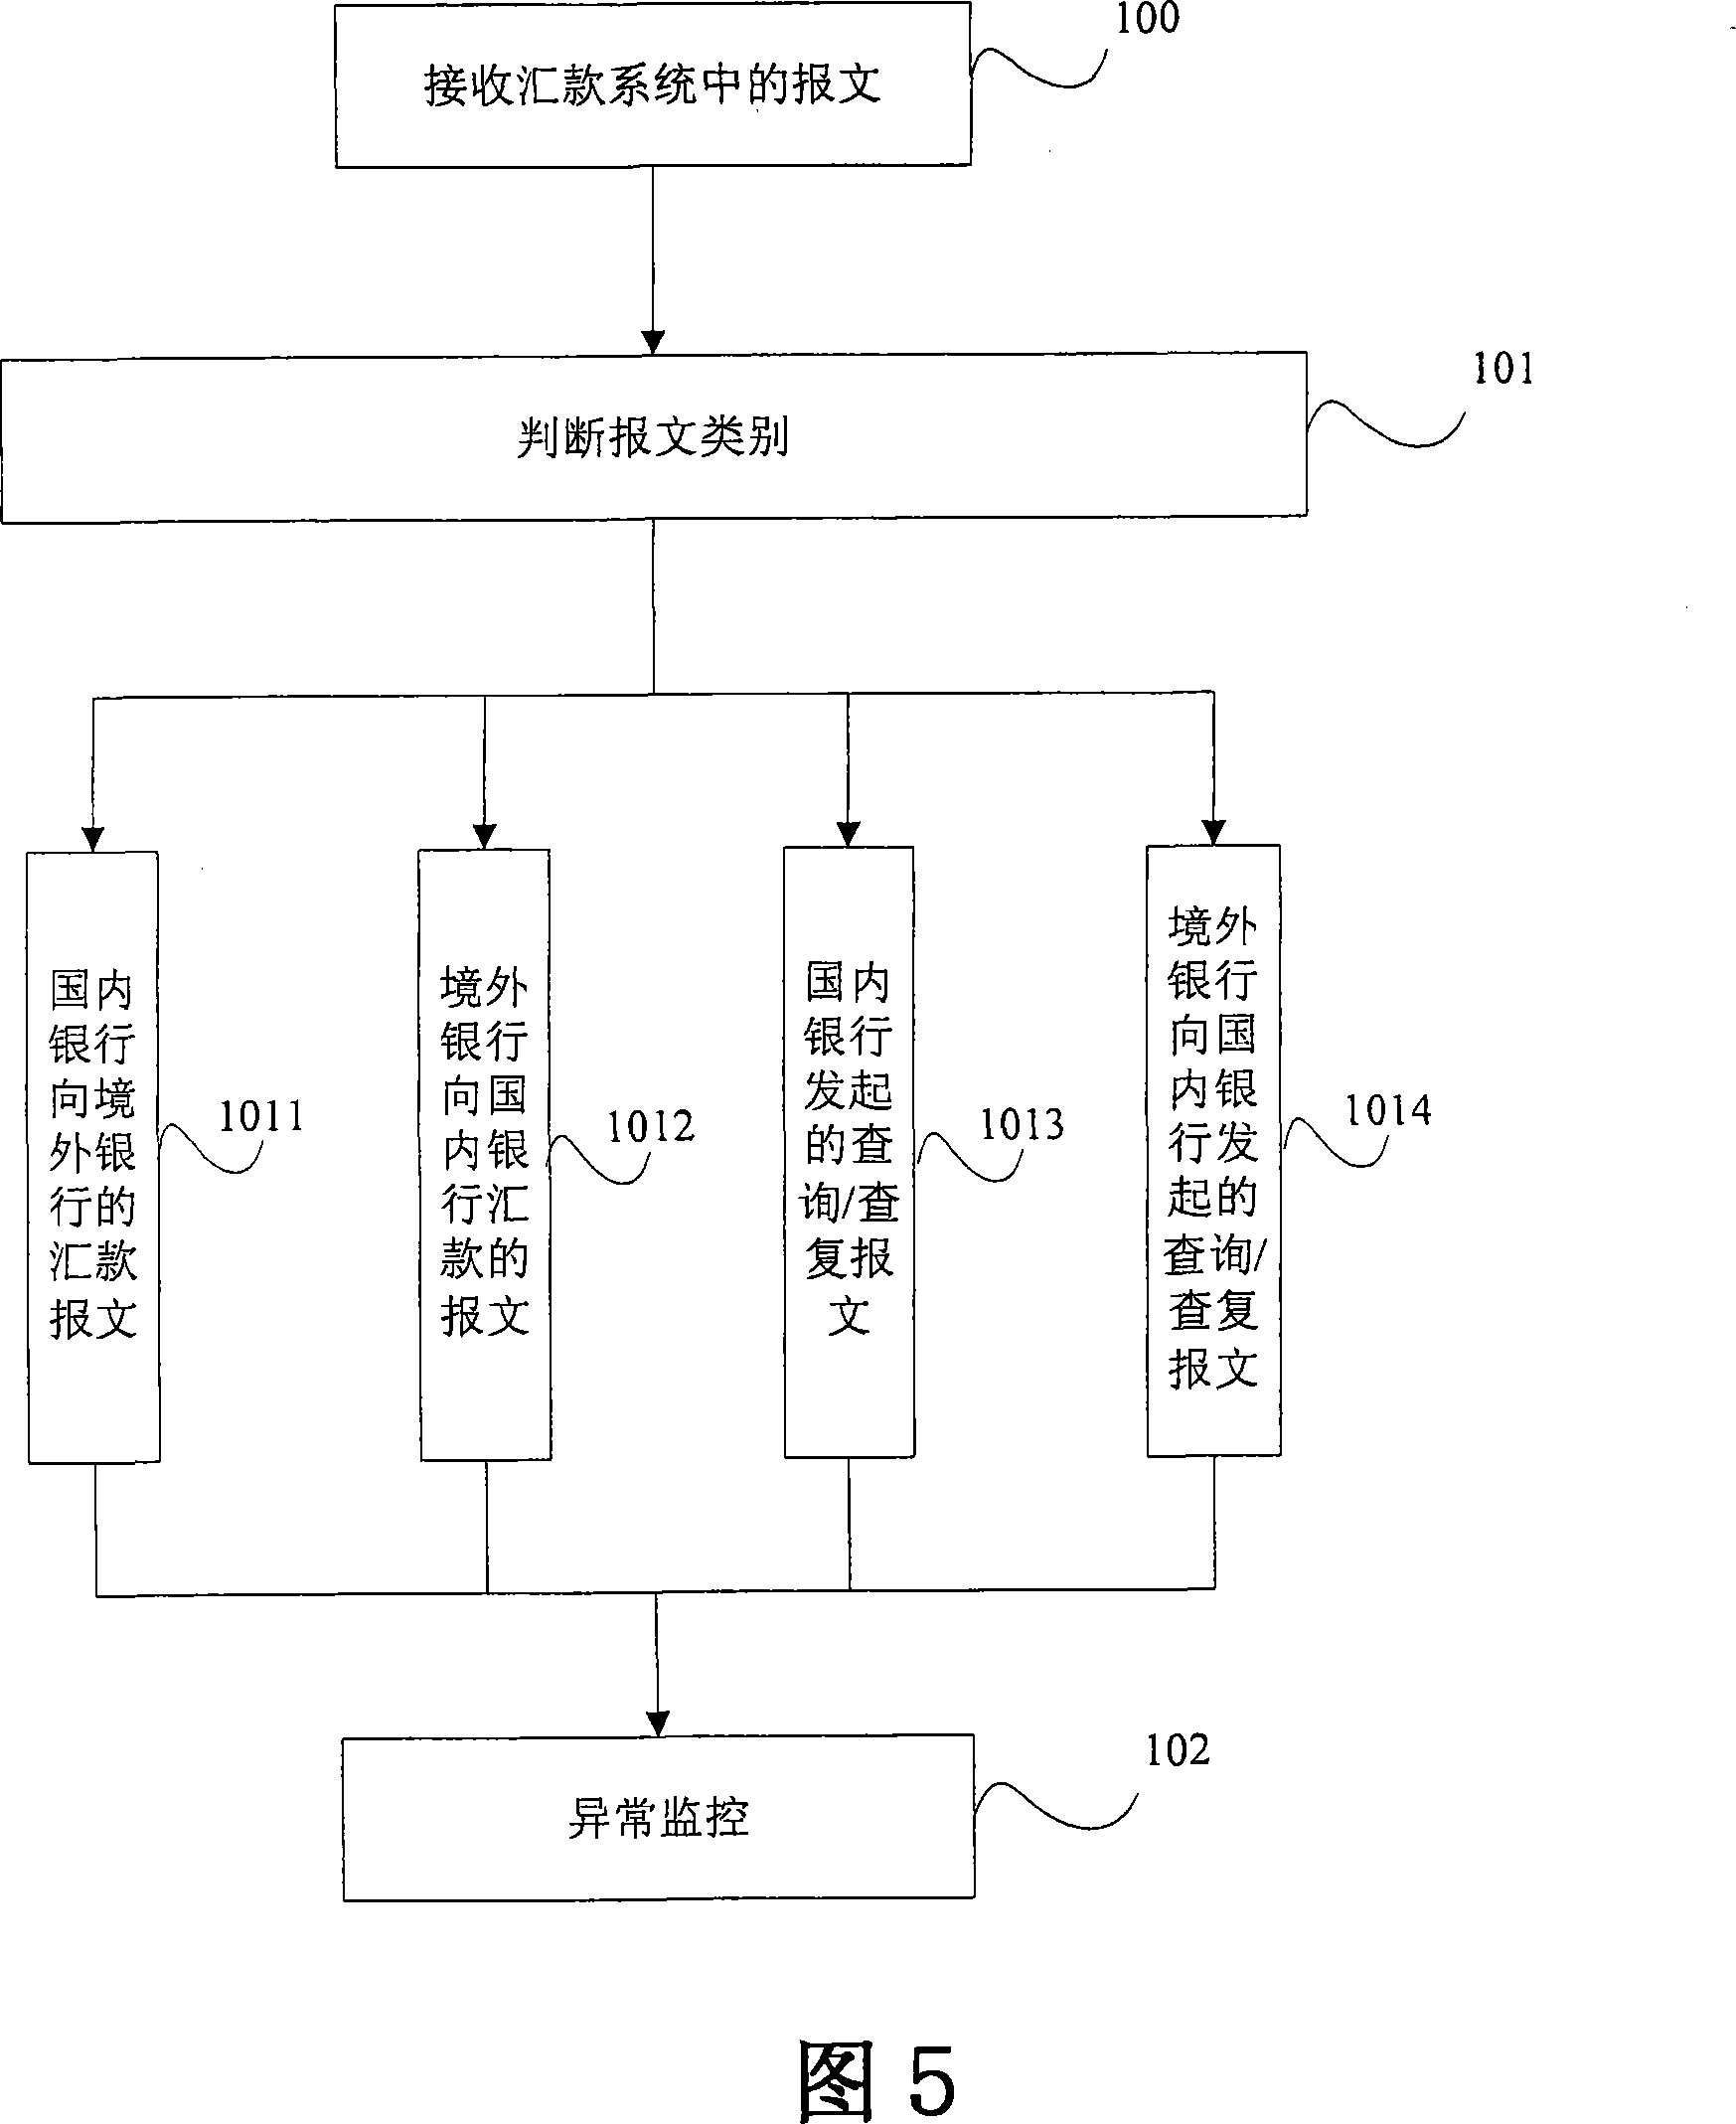 Remittance path following system and method